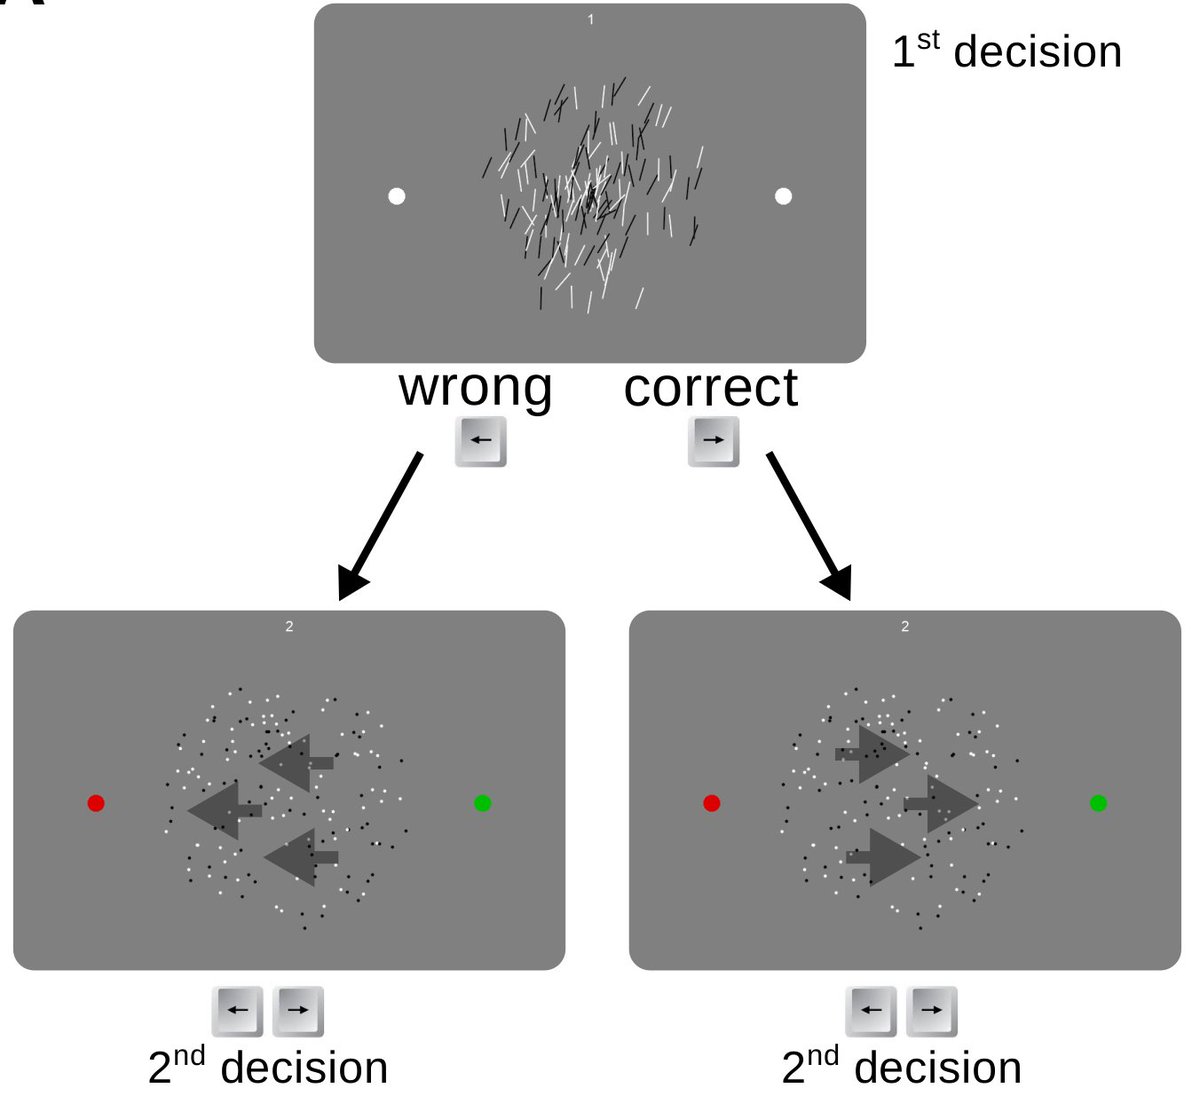 Our protocol mimics these situations with a sequence of 2 perceptual decisions, in which confidence in decision 1 gives the prior probability for the correct choice in decision 2.